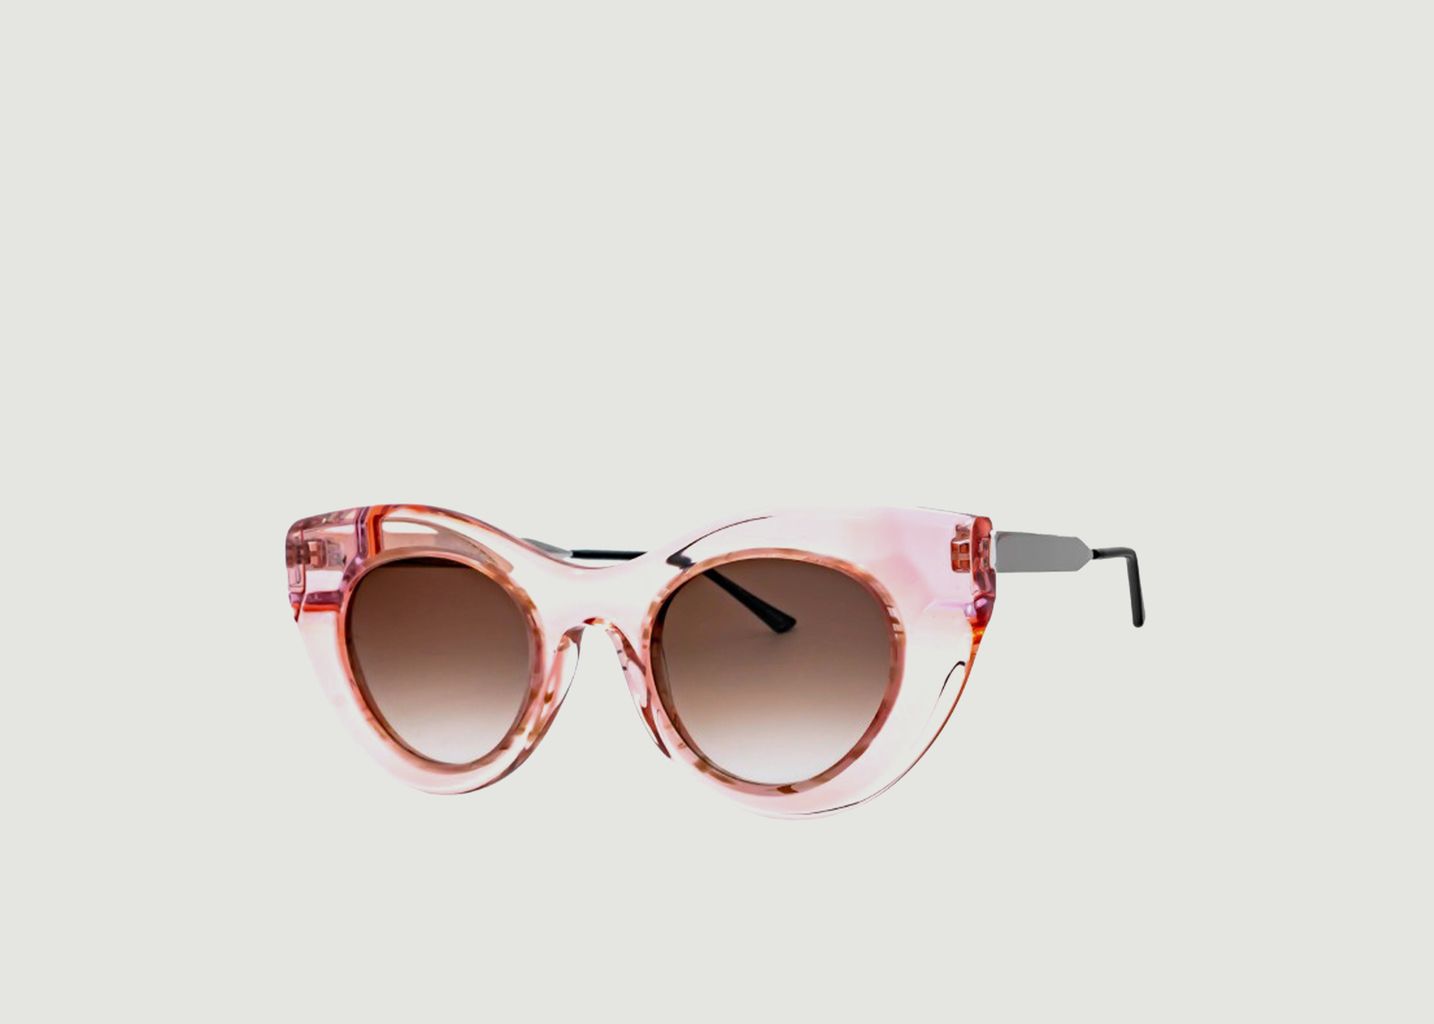 Revengy Sunglasses - Thierry Lasry